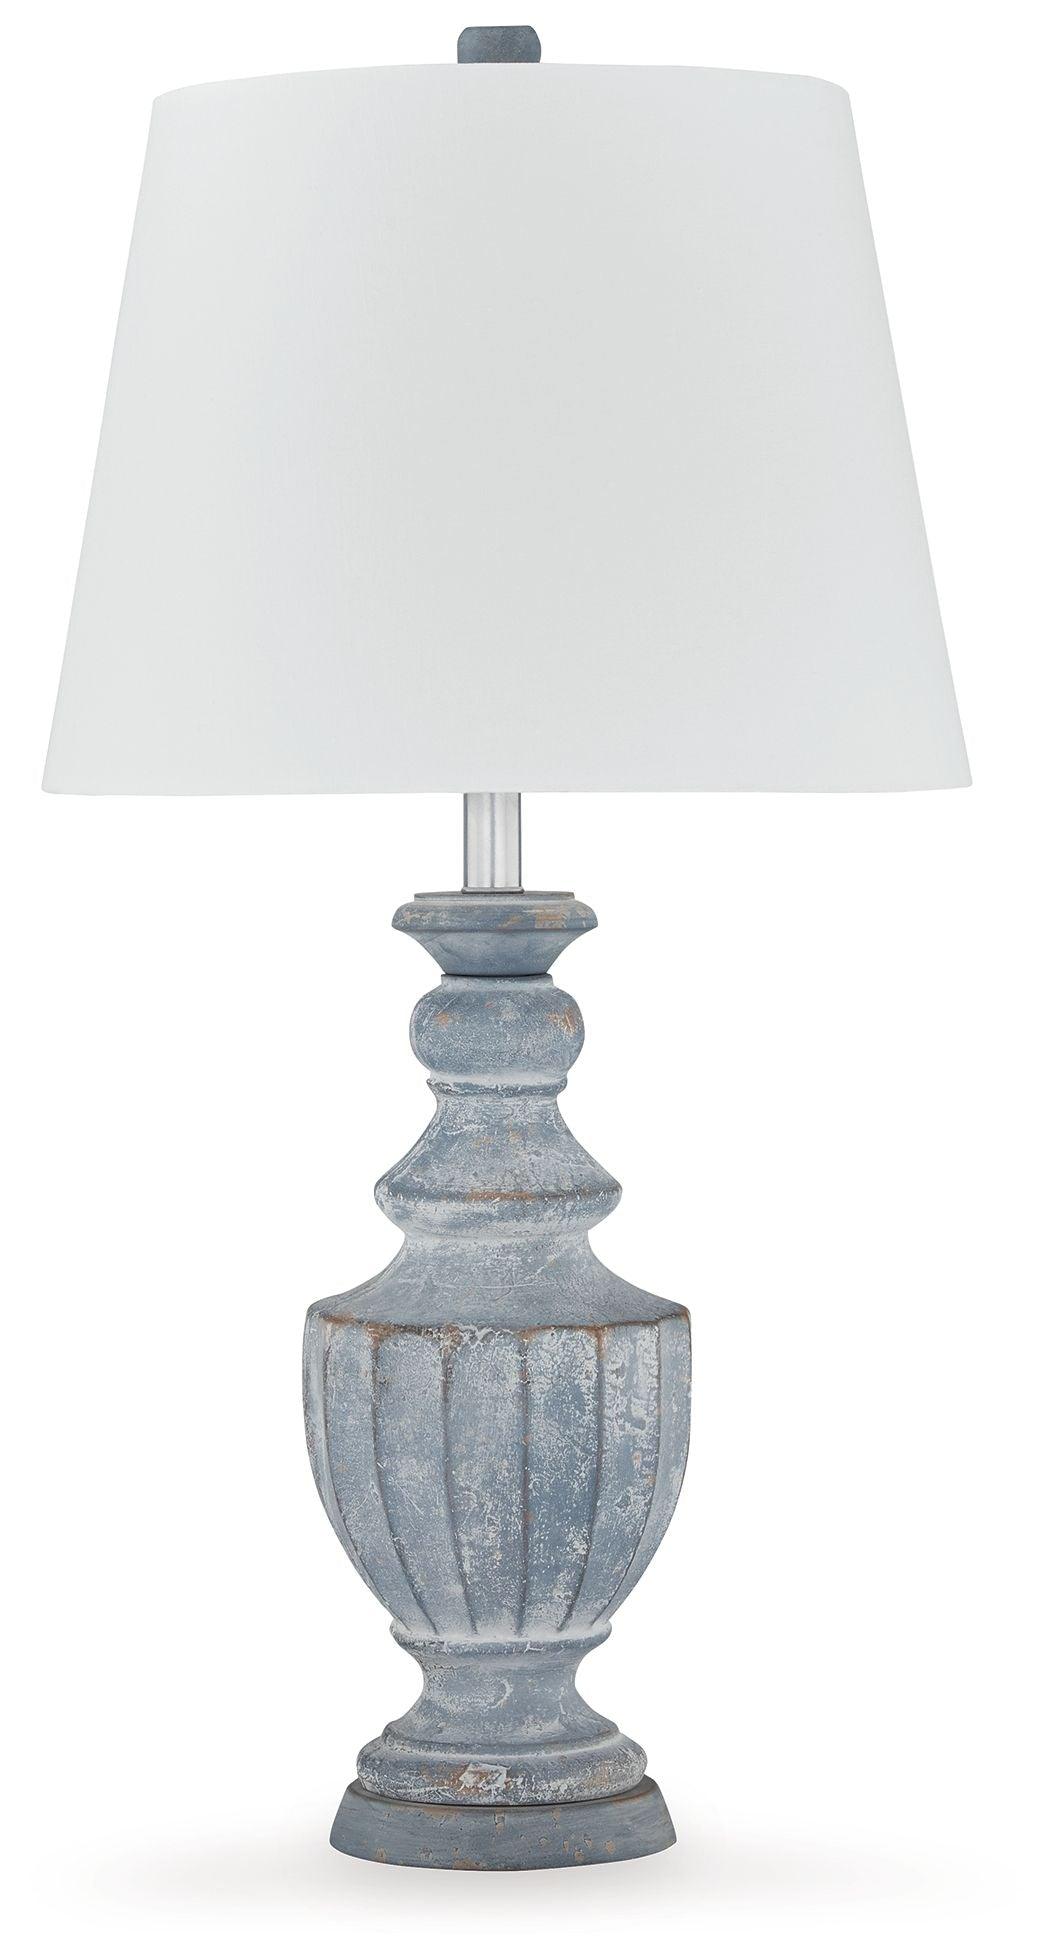 Signature Design by Ashley® - Cylerick - Antique Blue - Terracotta Table Lamp - 5th Avenue Furniture